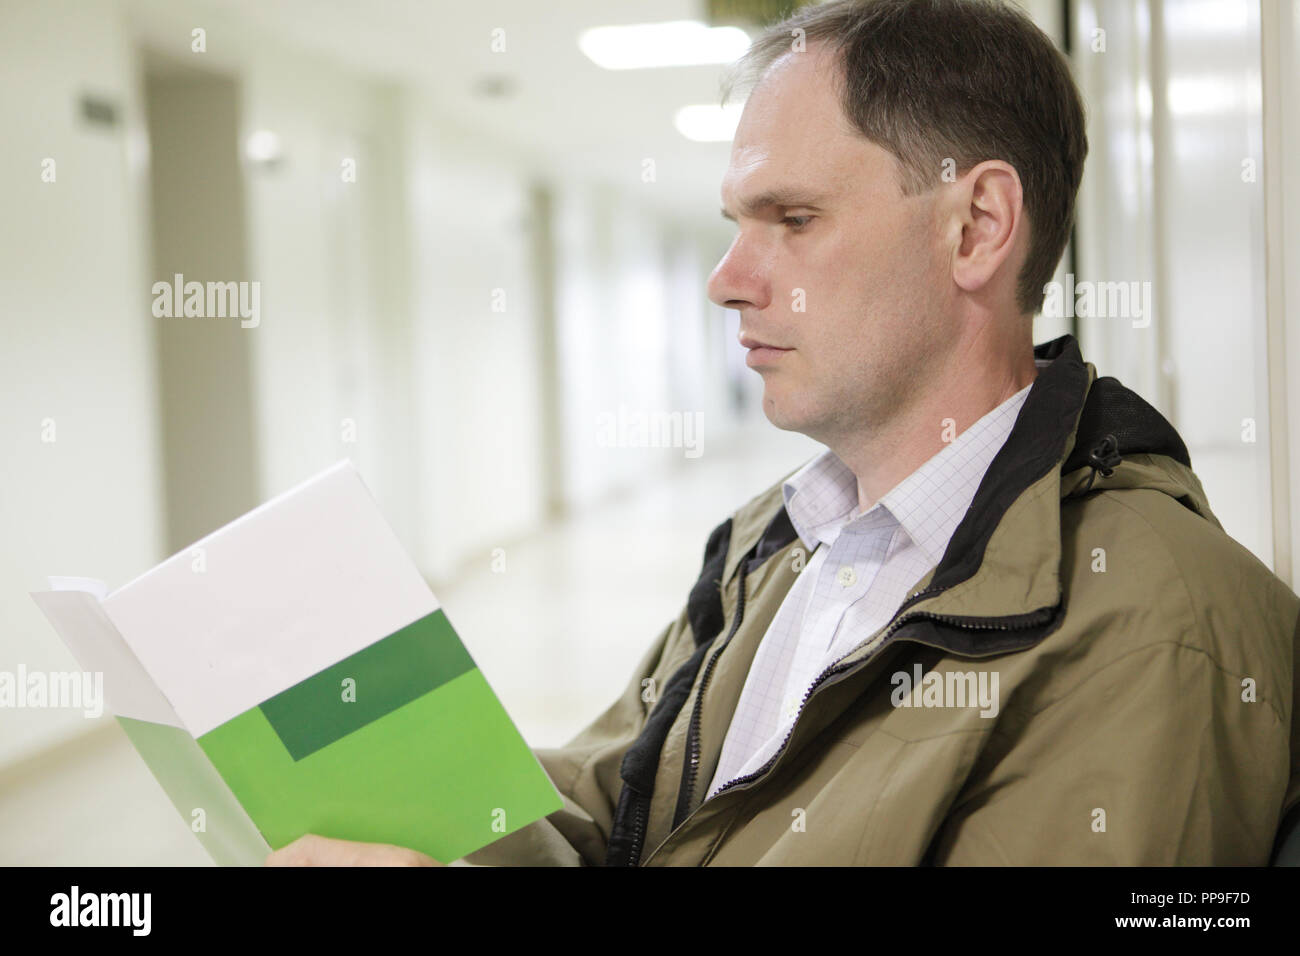 Patient reading health booklet in waiting room of hospital Stock Photo